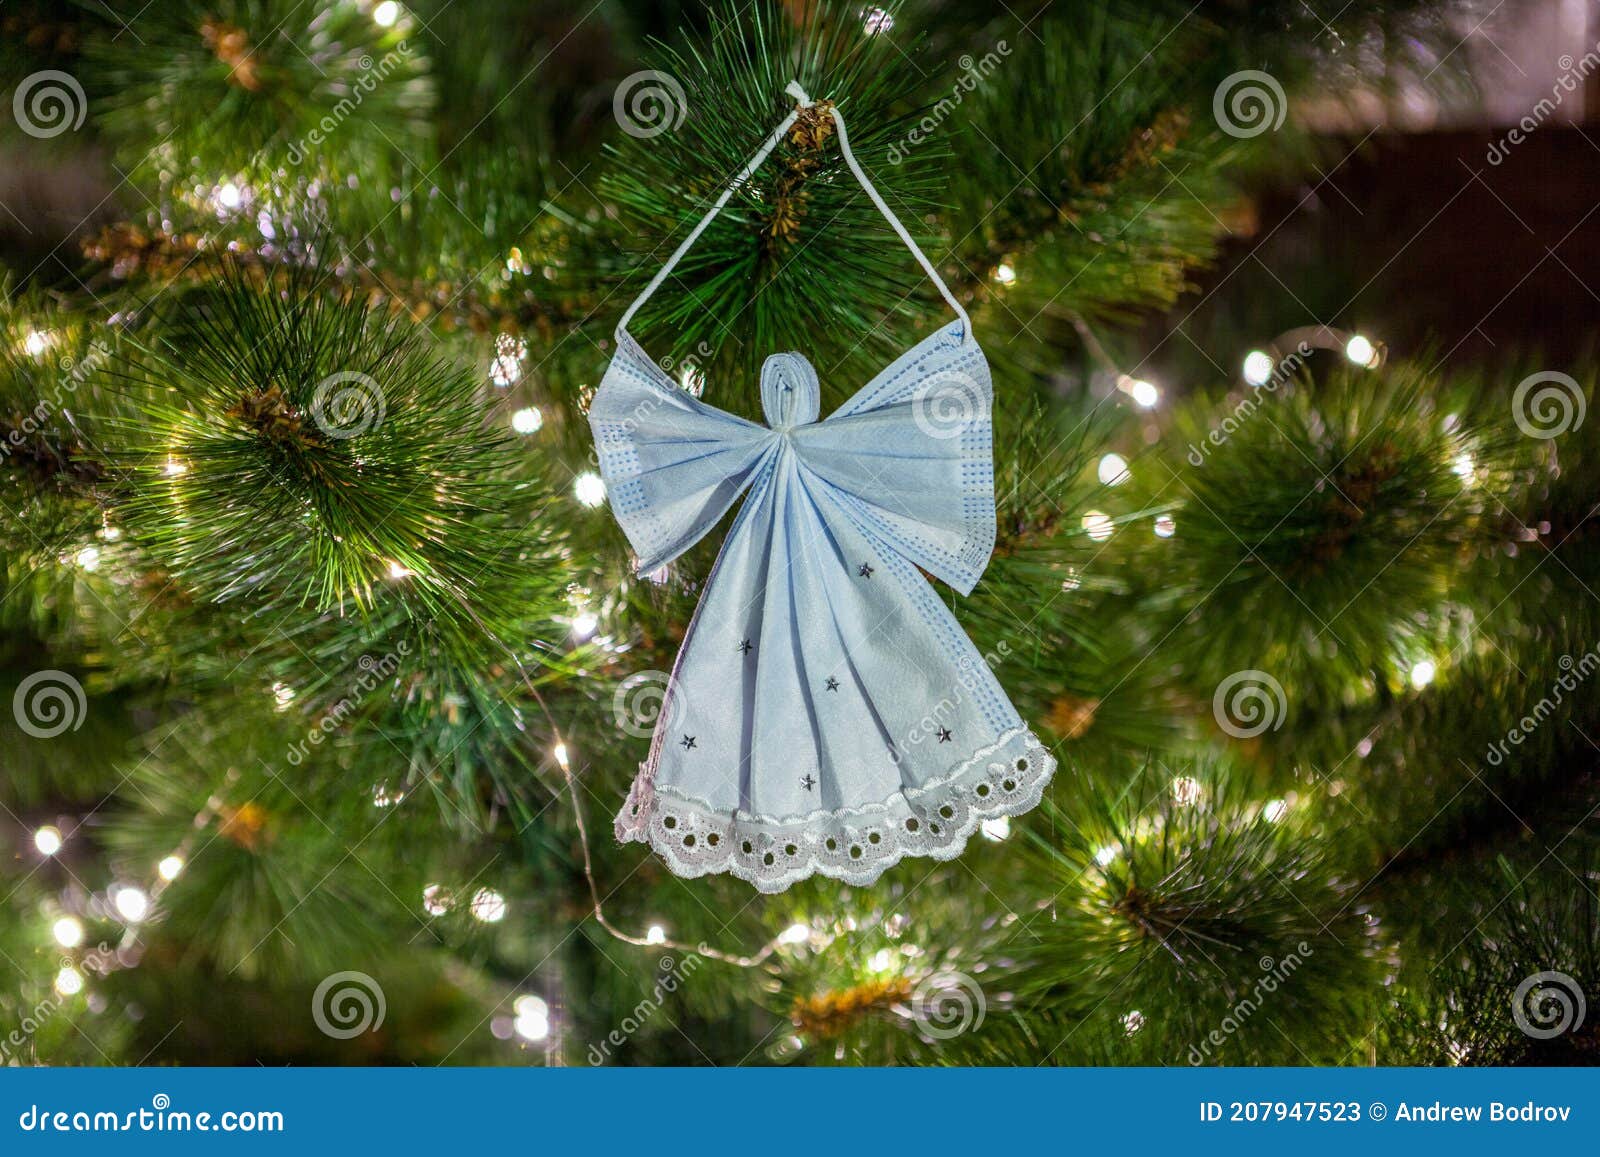 Christmas Tree Angel Surgical Face Mask for Coronavirus Prevention during  Holiday Family Holiday. Social Distancing Symbol. Take C Stock Image -  Image of light, tree: 207947523